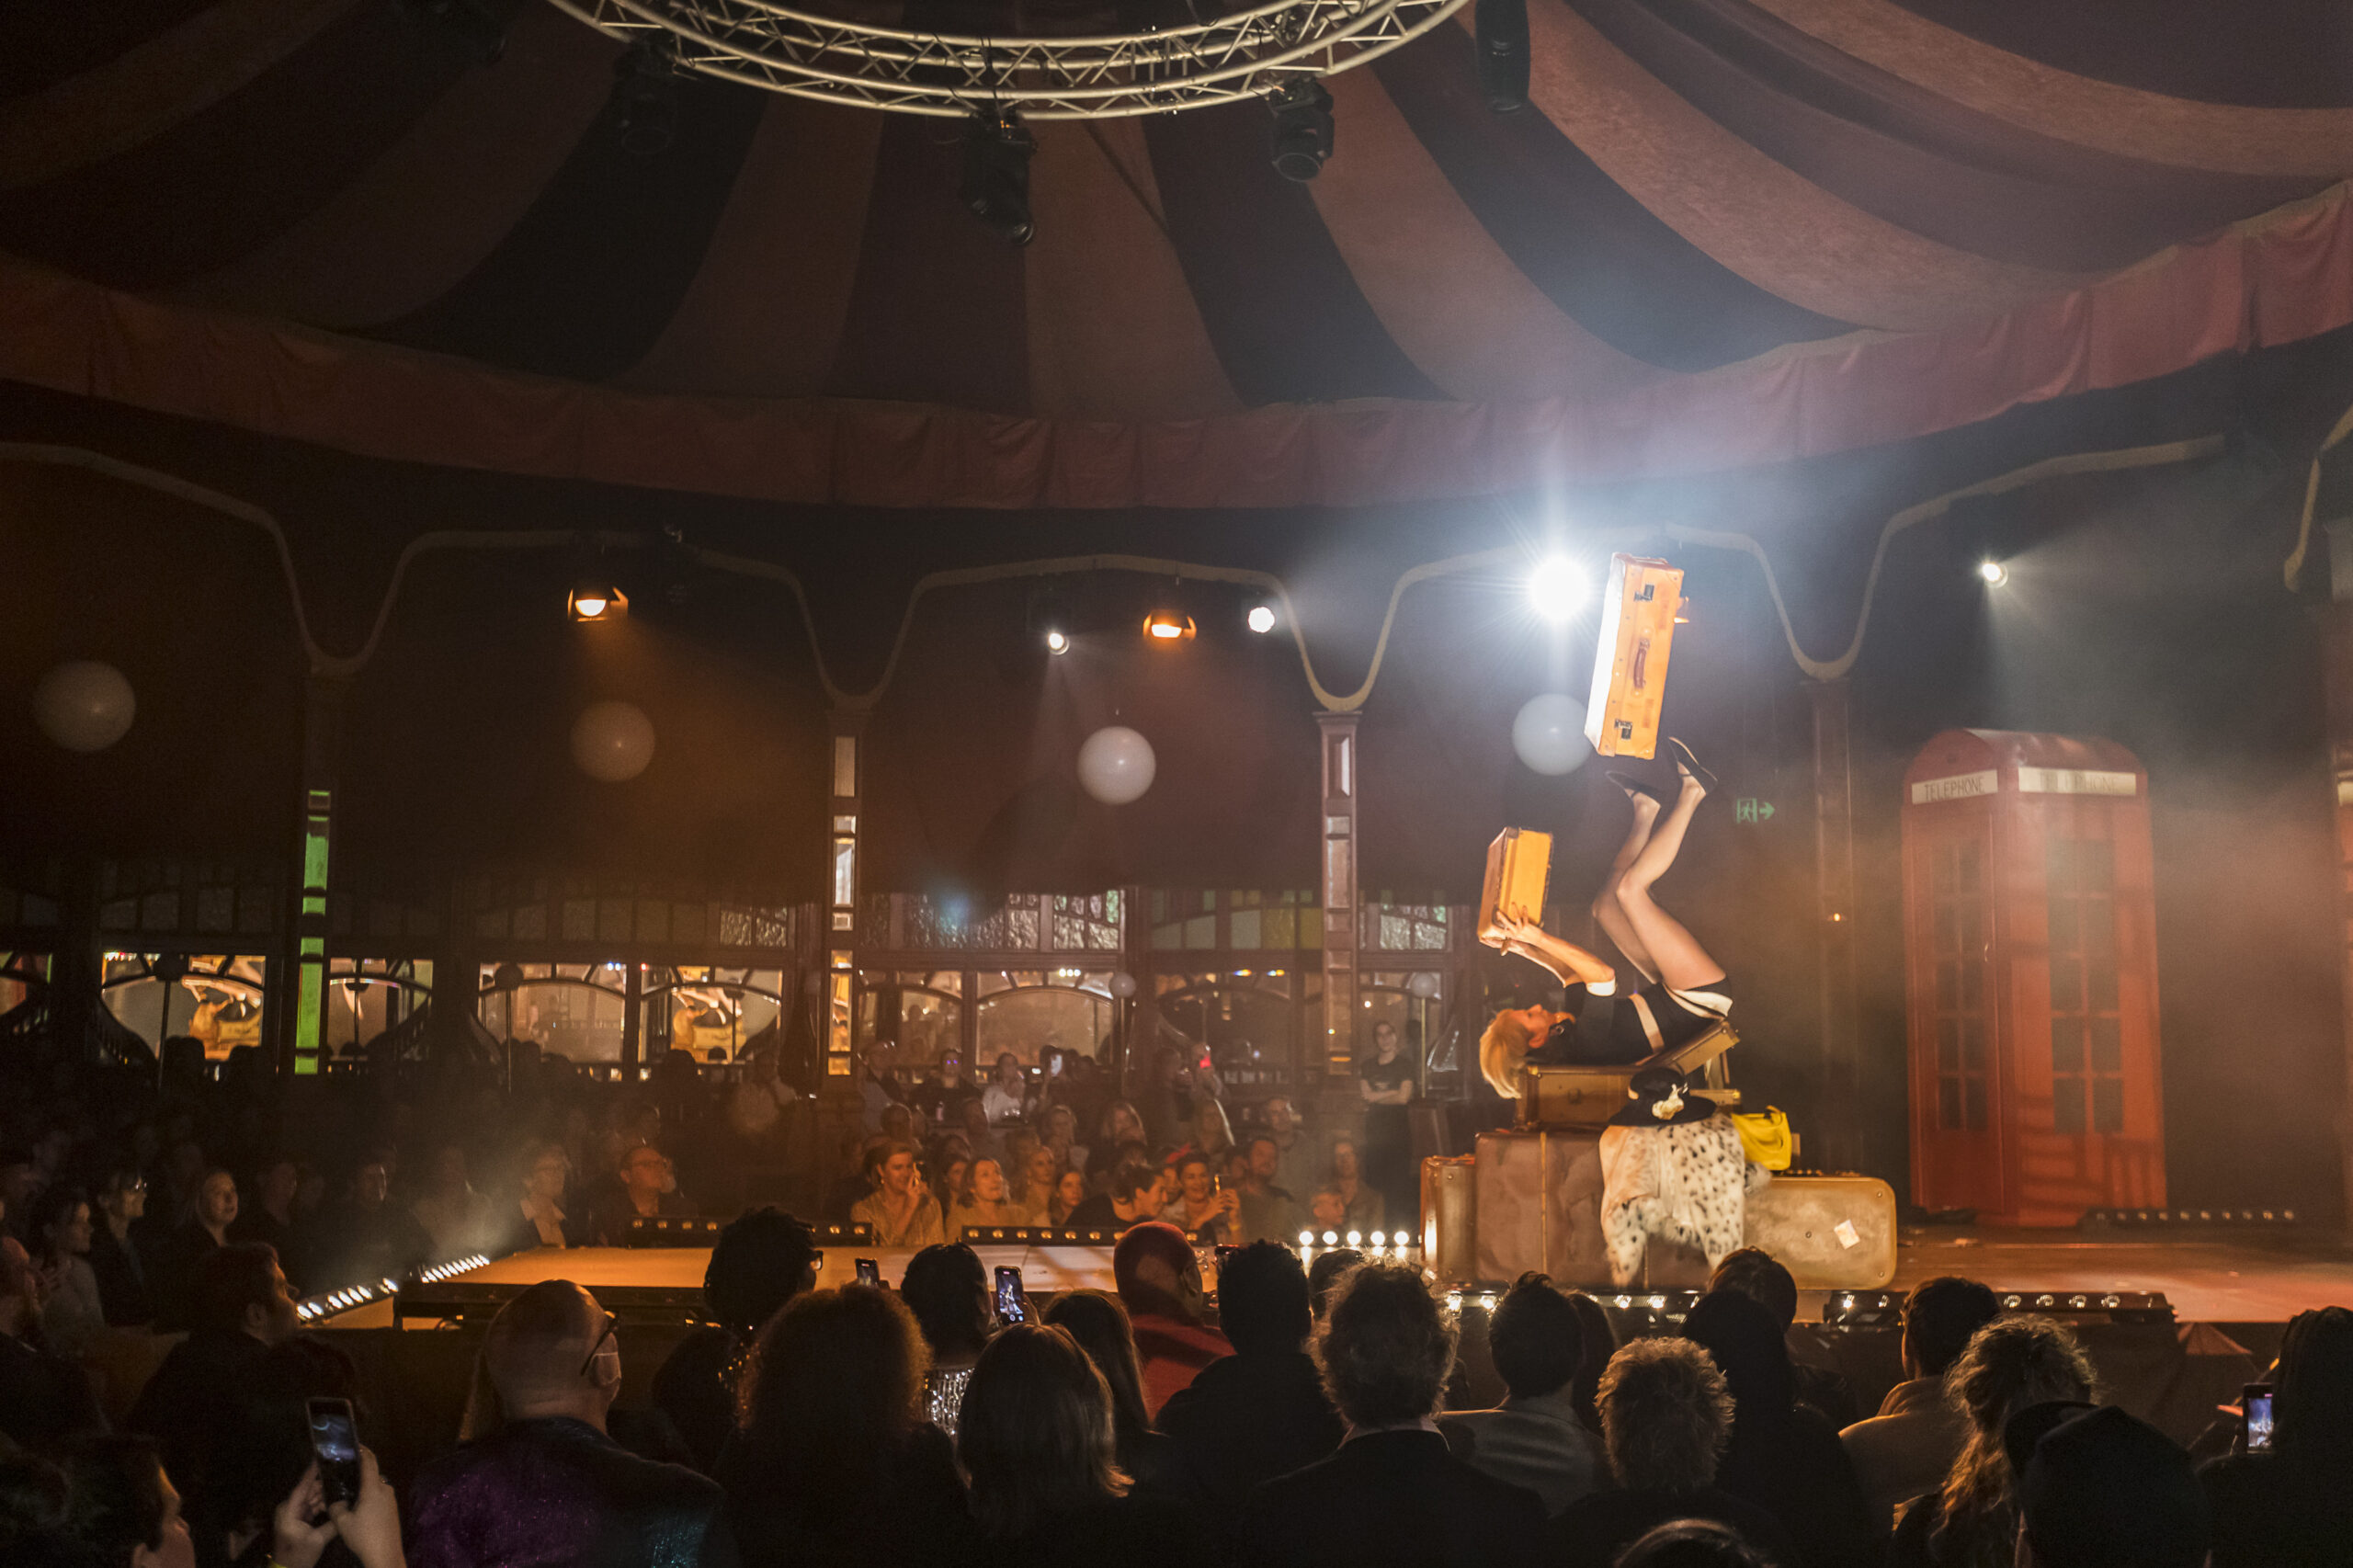 Merrigong Theatre Company presented Spiegeltent performances in Wollongong